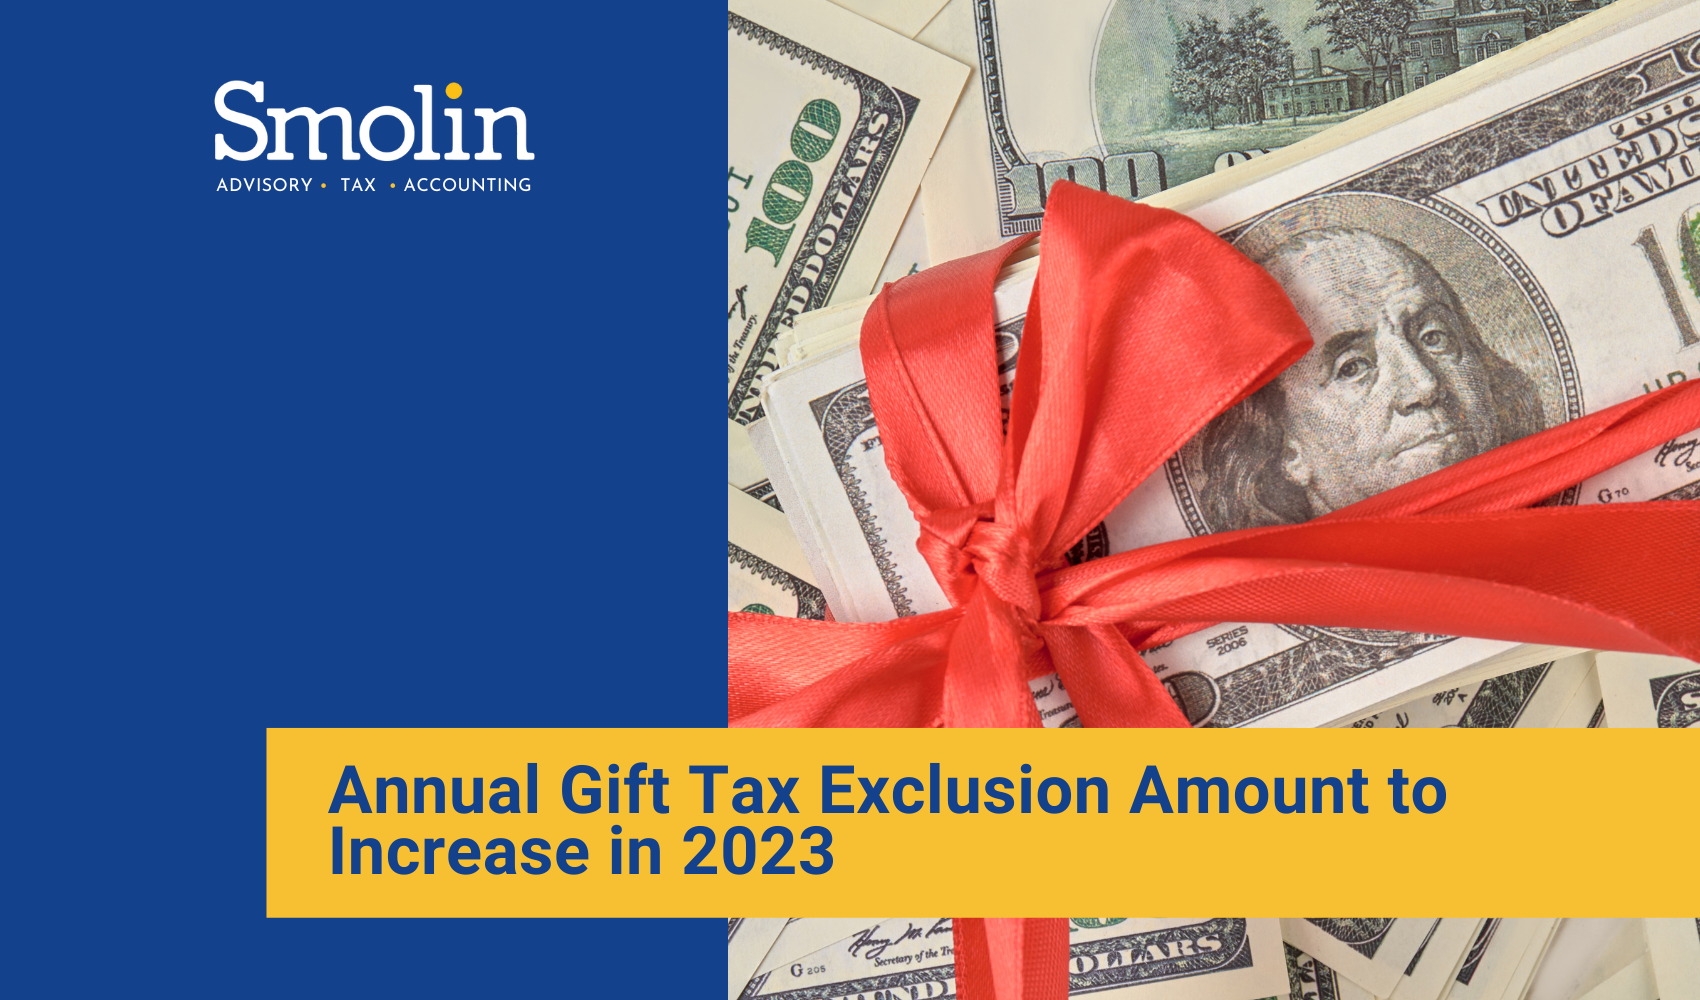 Annual Gift Tax Exclusion Amount to Increase in 2023